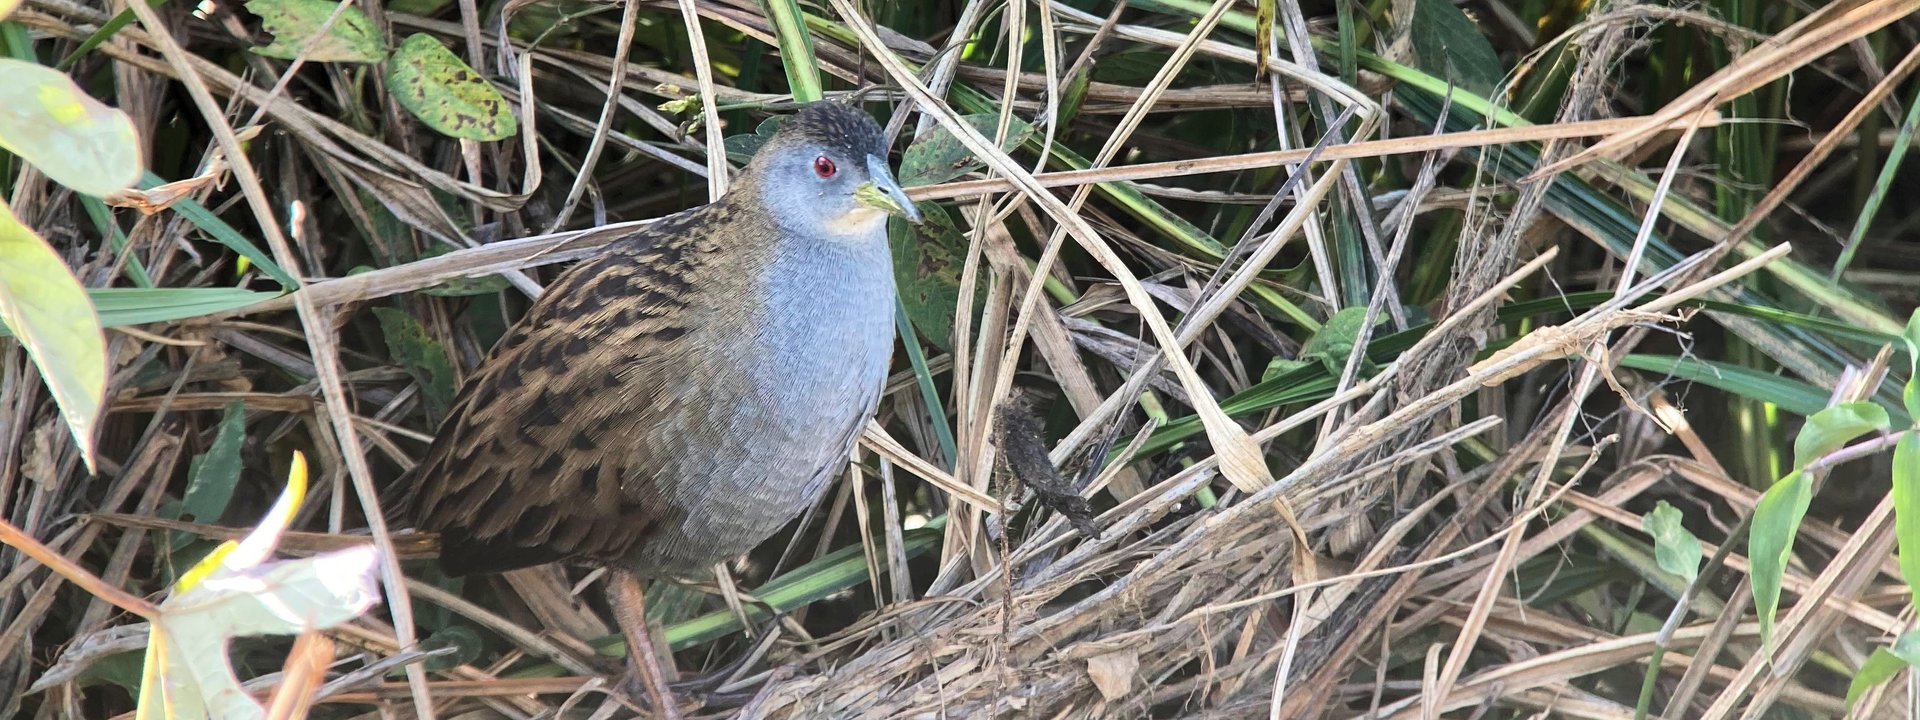 https://limosa-holidays-co-uk.s3.amazonaws.com/images/13_Ash-throated_Crake_at_Sumidour.4e0f400d.fill-1920x720.jpg